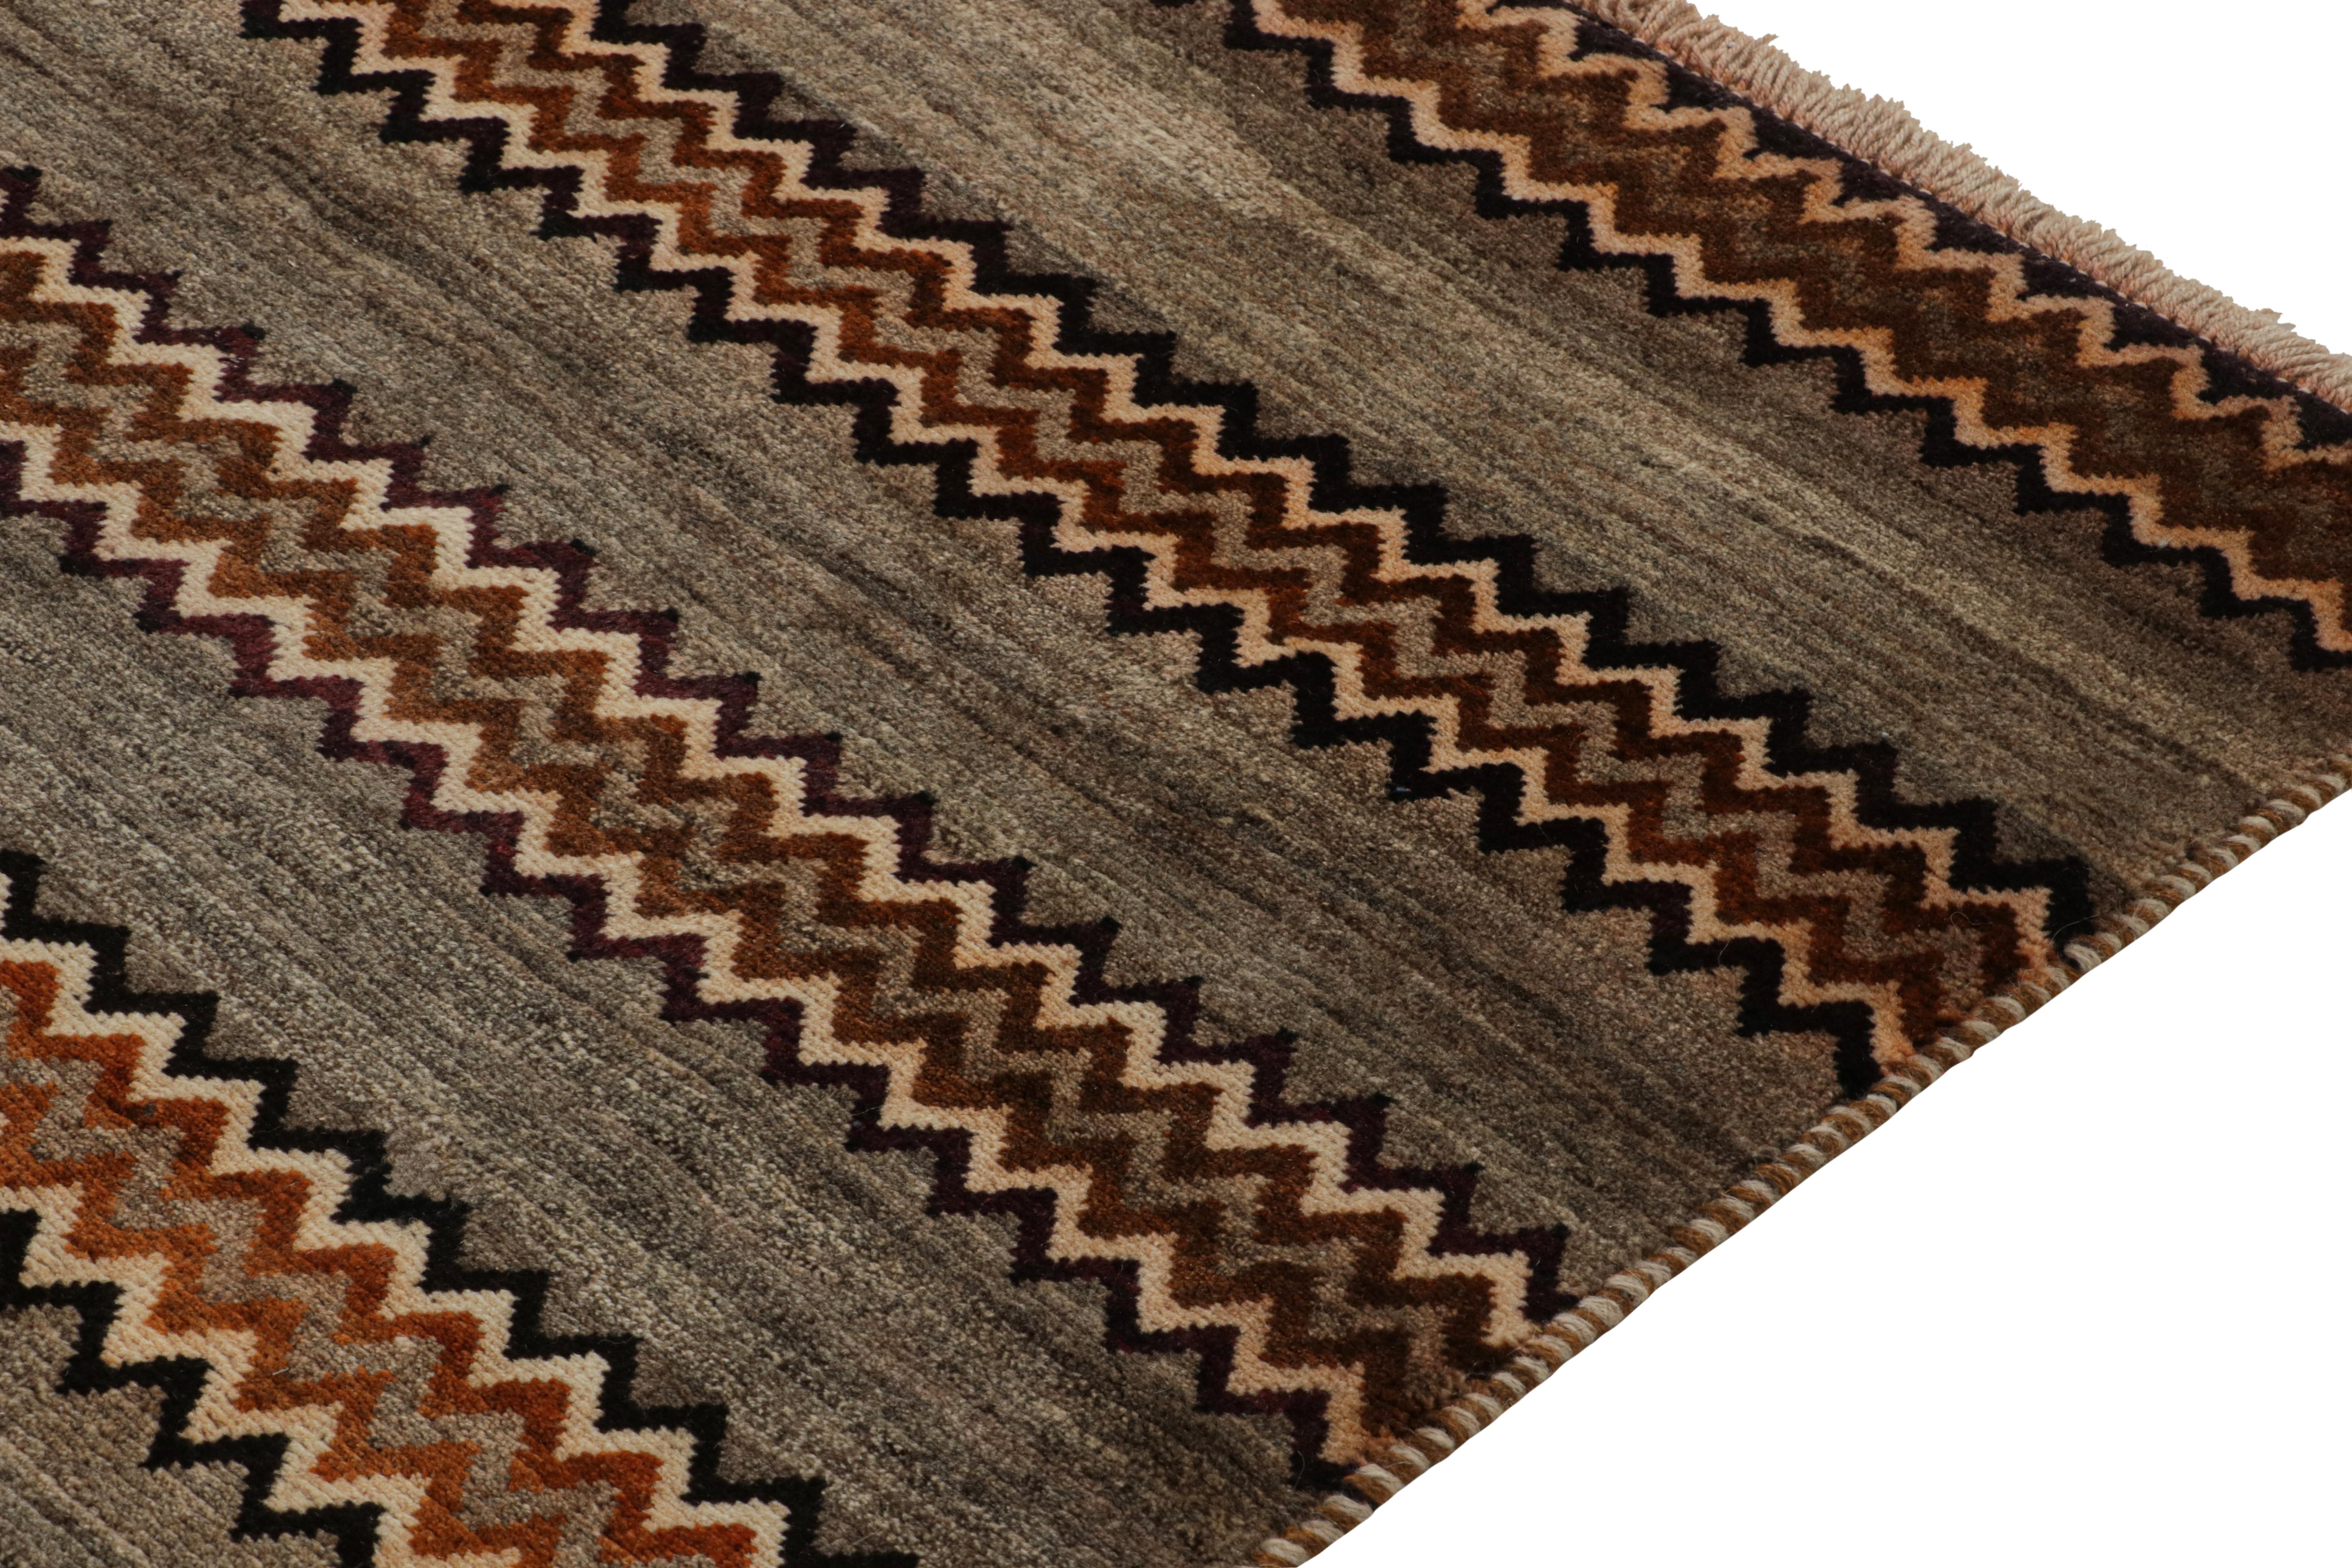 Vintage Gabbeh Tribal Rug in Gray & Beige-Brown Chevron Patterns by Rug & Kilim In Good Condition For Sale In Long Island City, NY